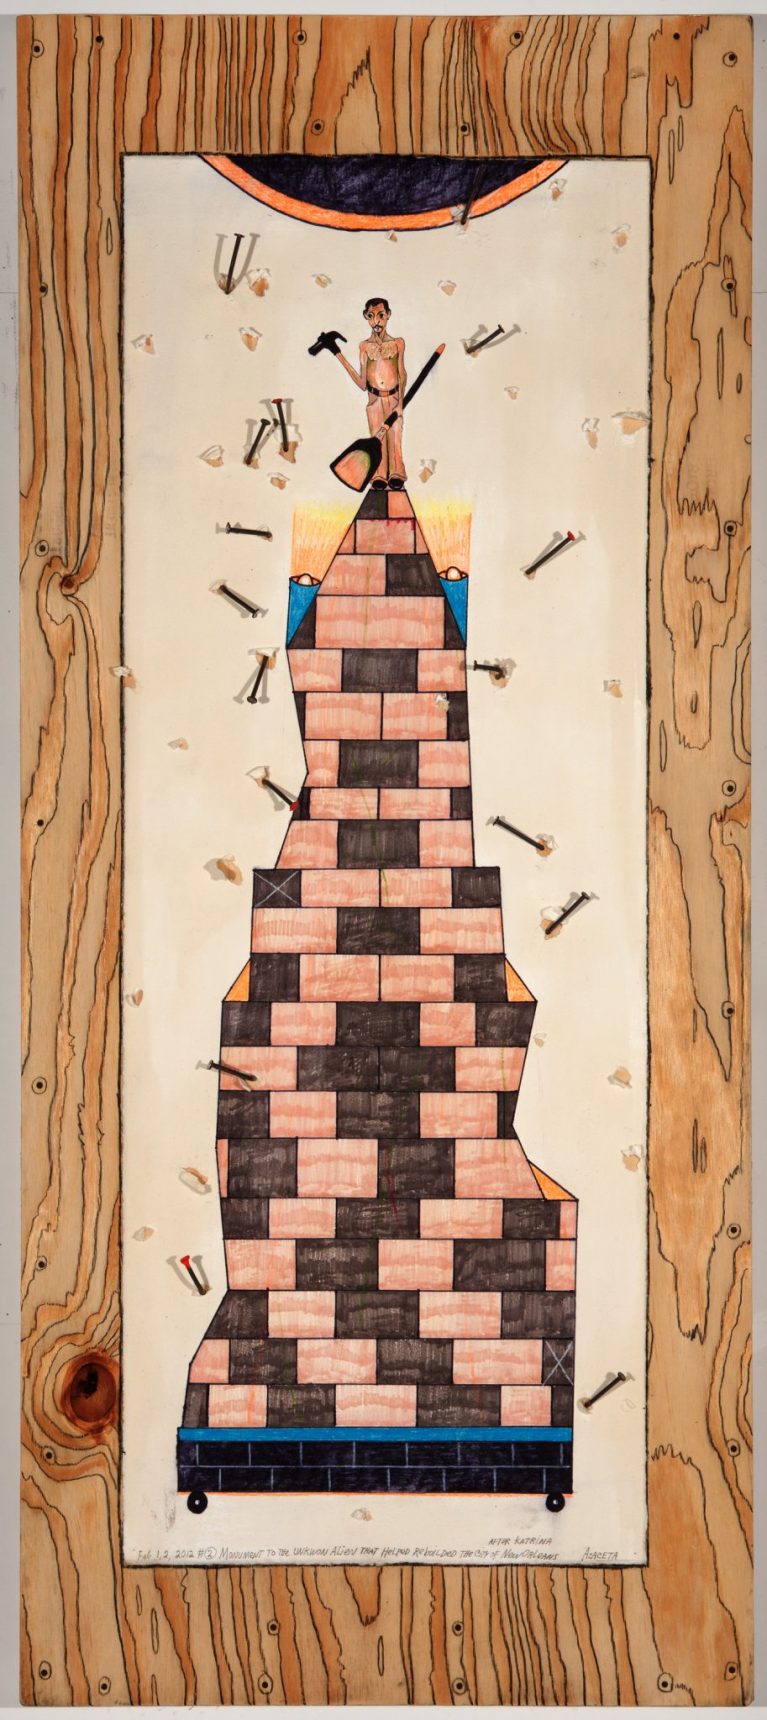 https://ogdenmuseum.org/wp-content/uploads/2021/12/51-2012_-MONUMENT_-48x21_-Acrylic-markers-black-pencil-nails-on-paper-mounted-on-wood-copy-767x1720.jpg